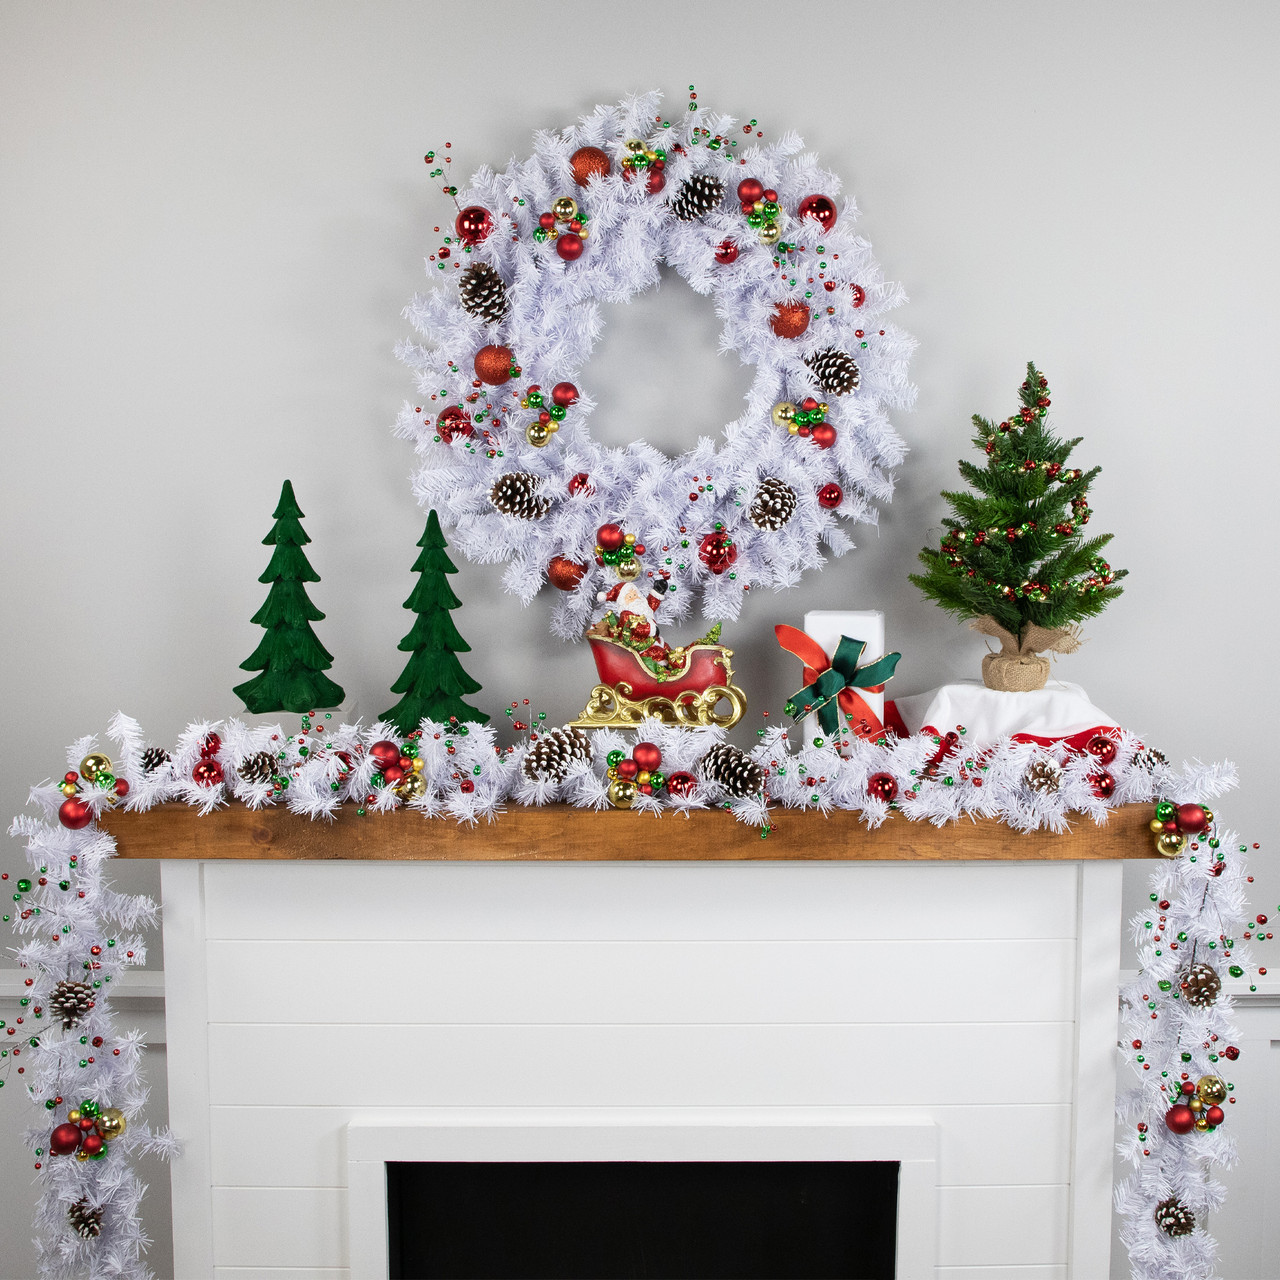 Northlight 100' x 10 Commercial White Canadian Pine Artificial Garland